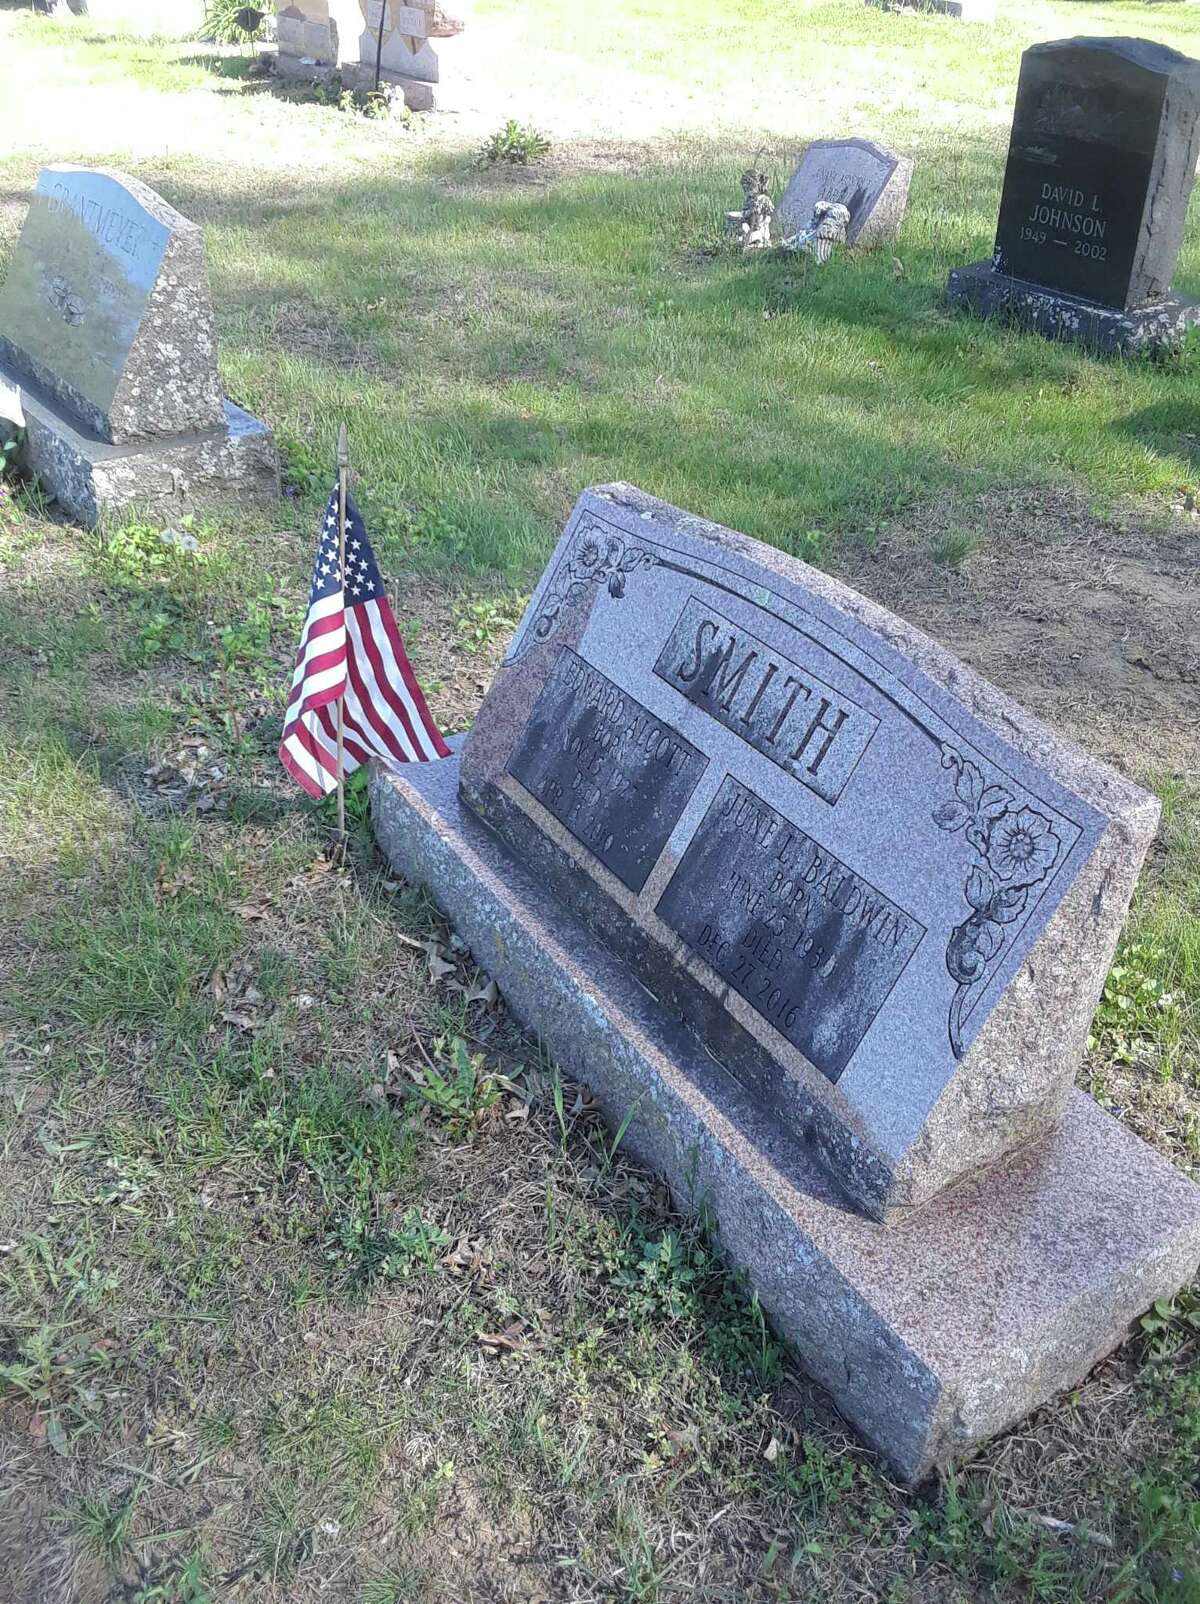 Veterans groups and volunteers spent time in local cemeteries replacing flags on veterans' graves in preparation for Memorial Day. Above, a gravestone at Forest View Cemetery in Winsted.